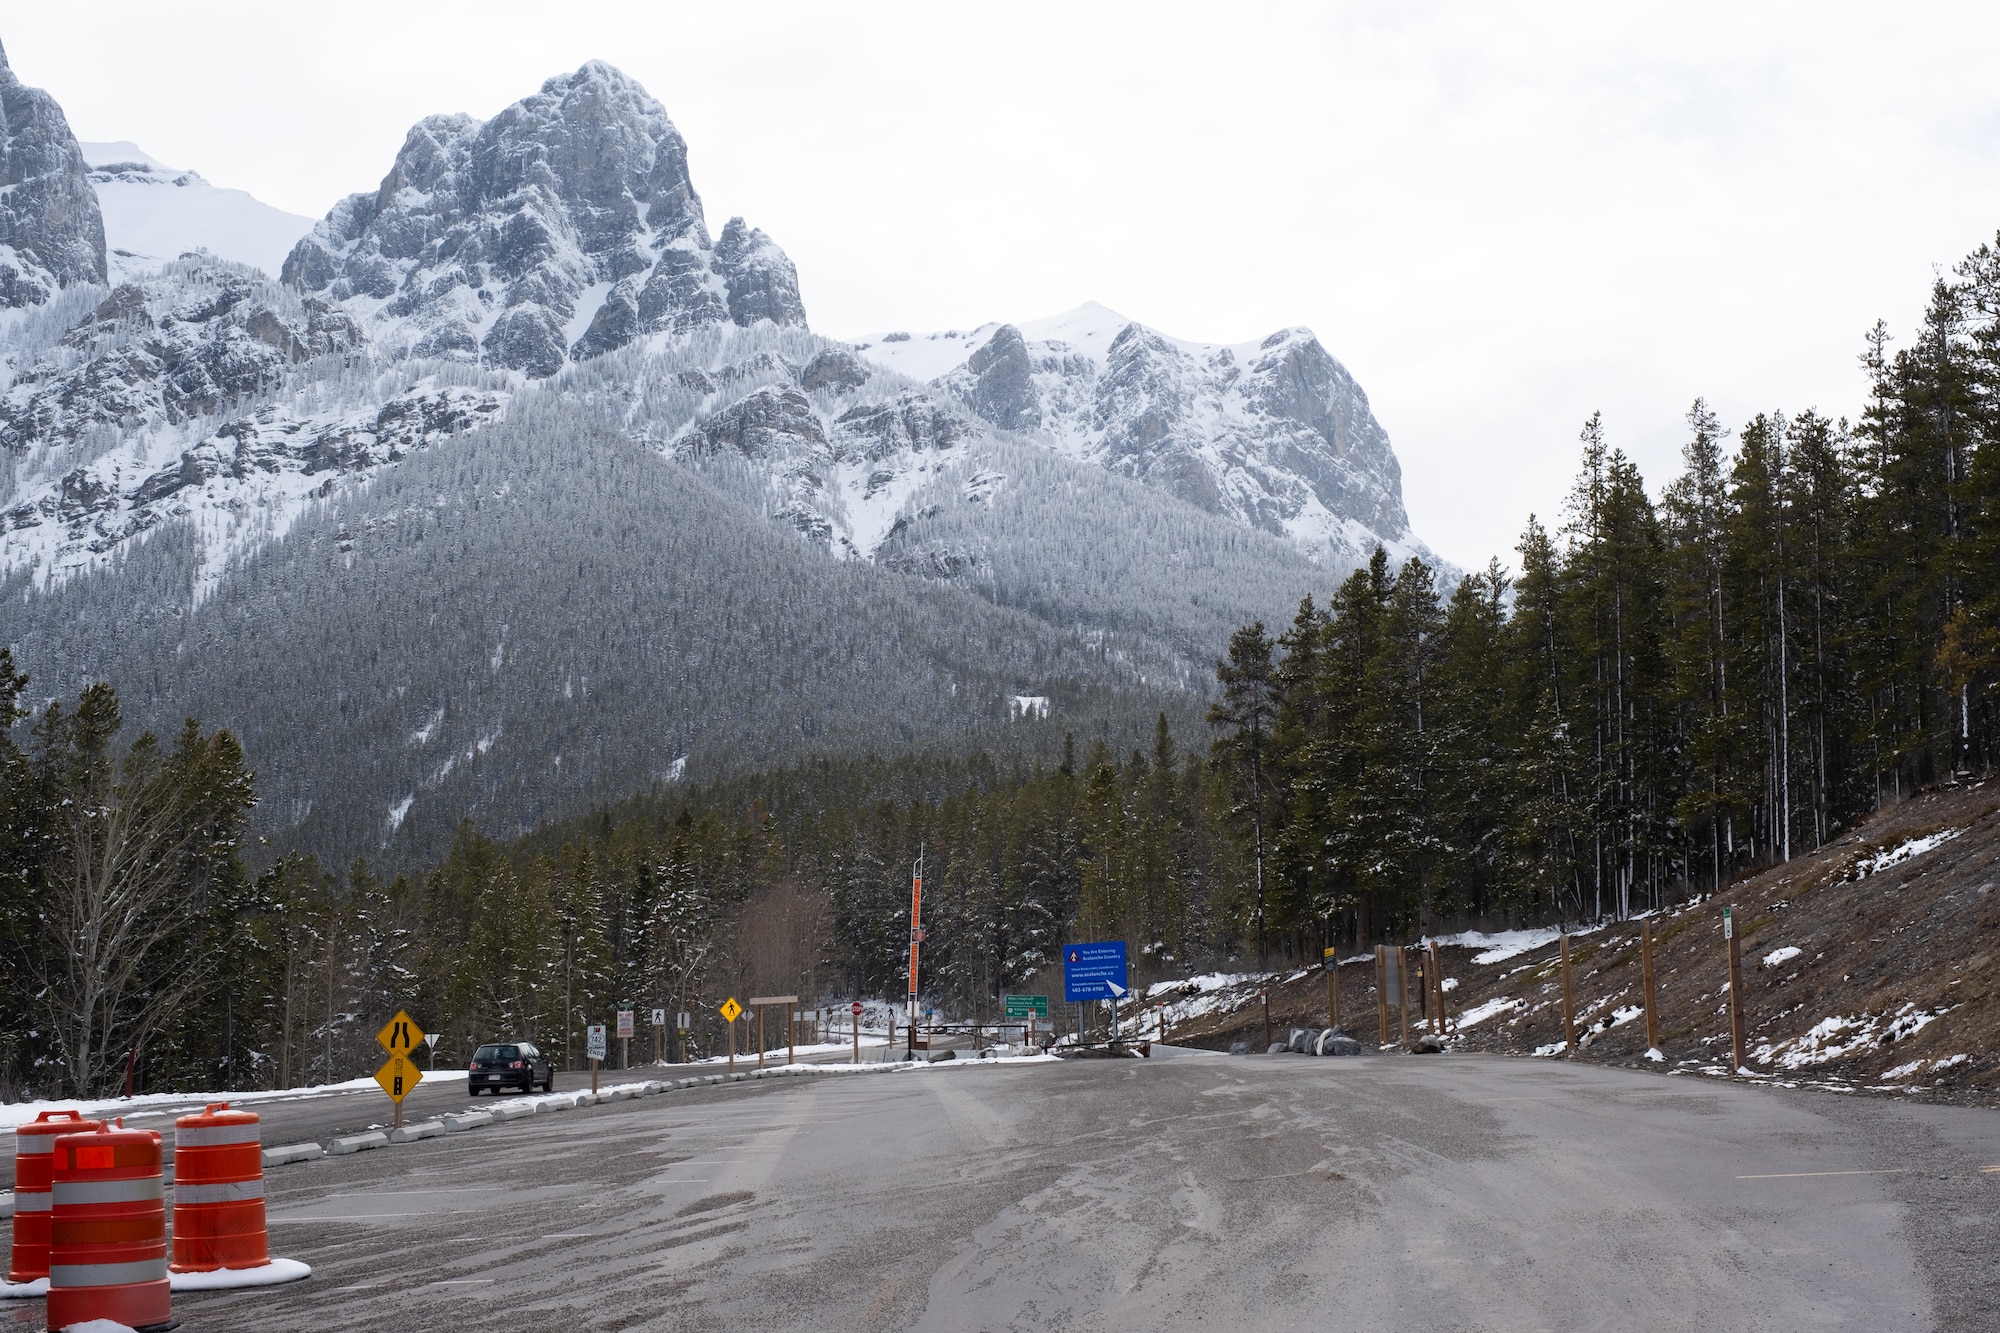 Extra Parking Area for Grassi Lakes